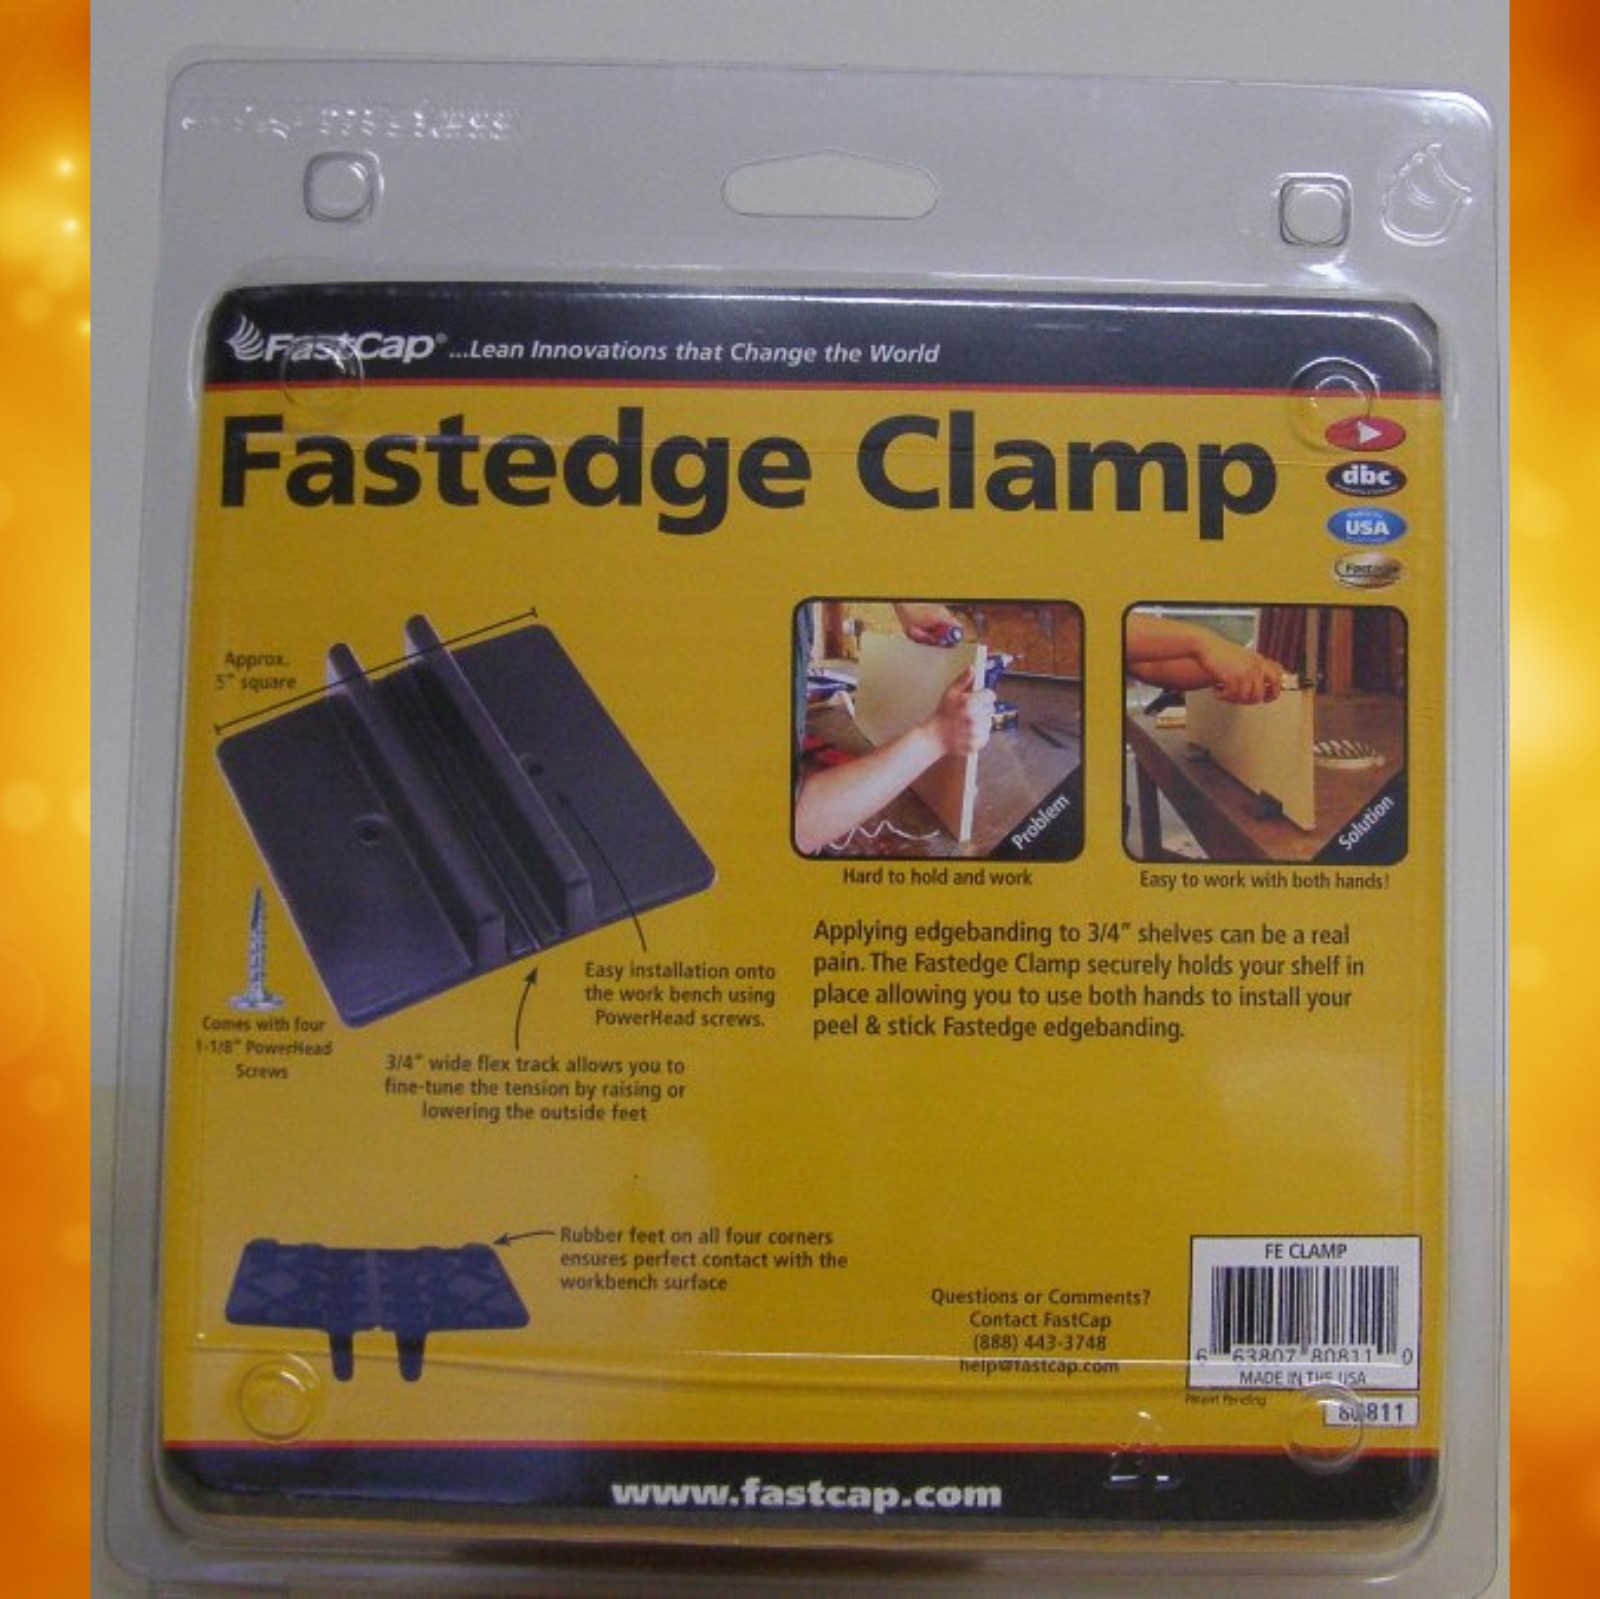 FastCap Fastedge Clamp (2 pack) FE-CLAMP
FE-CLAMP